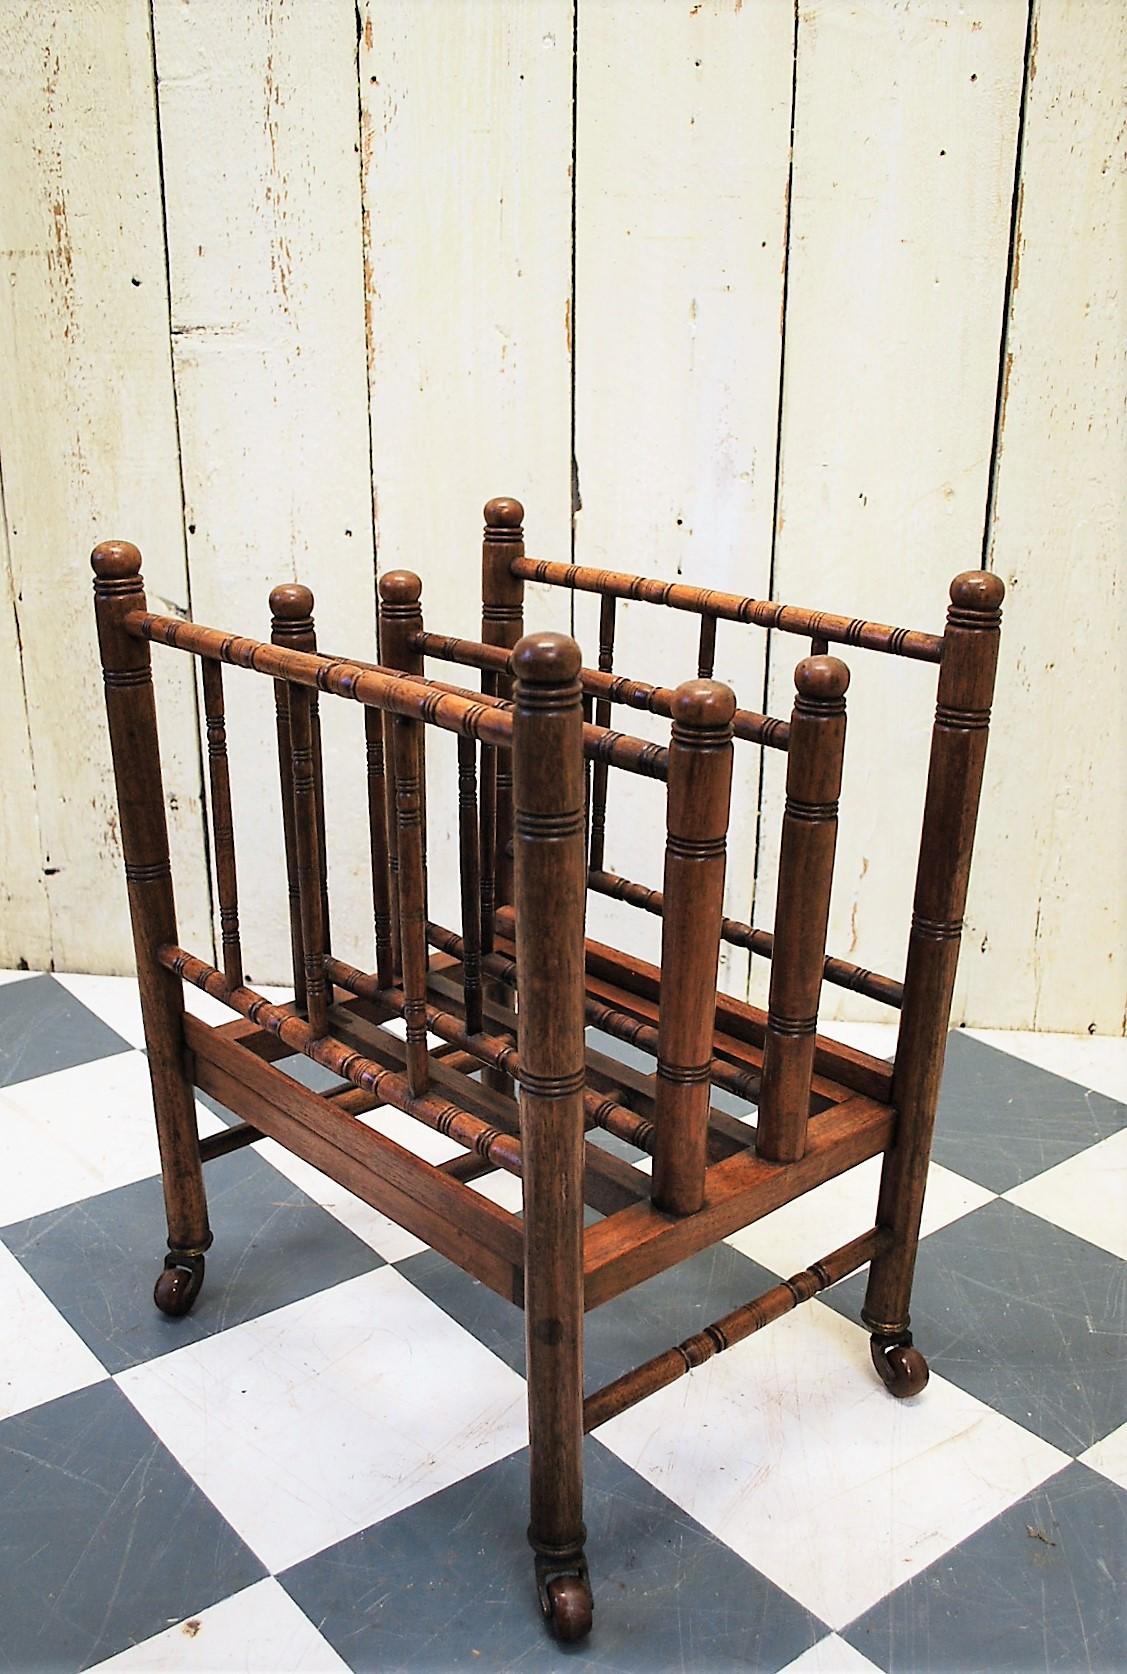 A rare and unusual Liberty & Co. magazine rack or canterbury, circa 1910. Beautifully made and very sturdy in solid walnut, with fine quality turnings. Standing on original porcelain castors with brass ferrels. A rare and unusual piece of liberty's